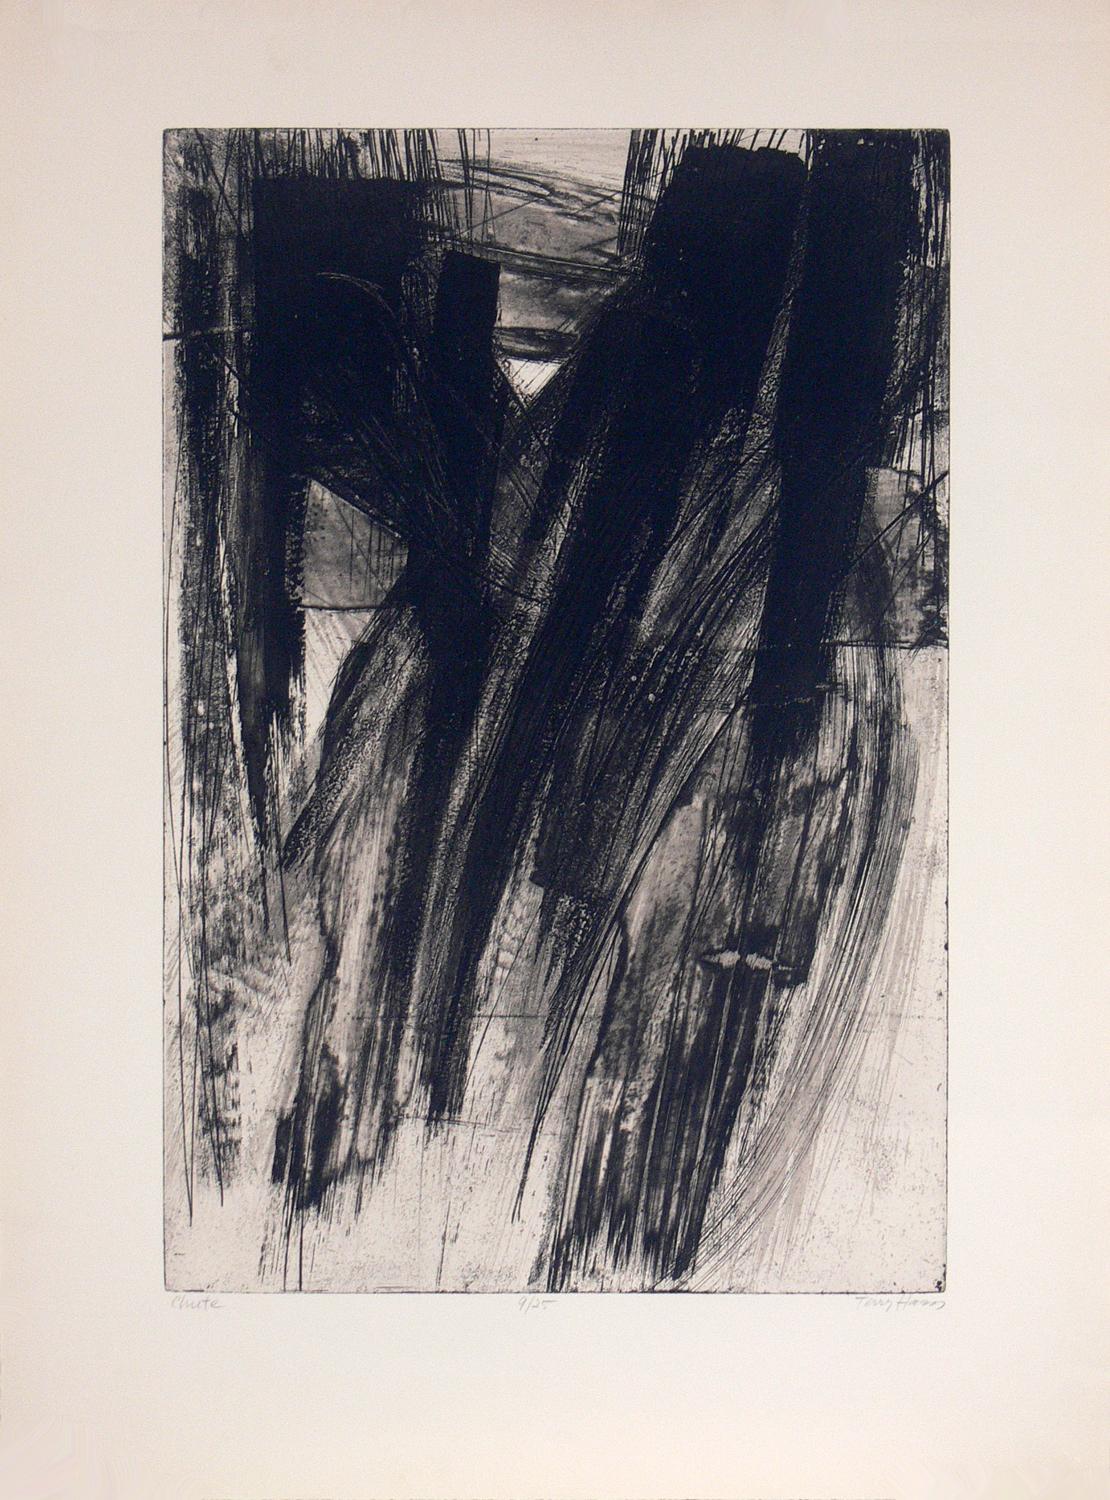 Selection of black and white abstract prints. From left to right, they are:
1) Abstract lithograph by Terry Haan, circa 1960s. Pencil signed and numbered by the artist, number 9 of a very limited edition of 25. It measures 33